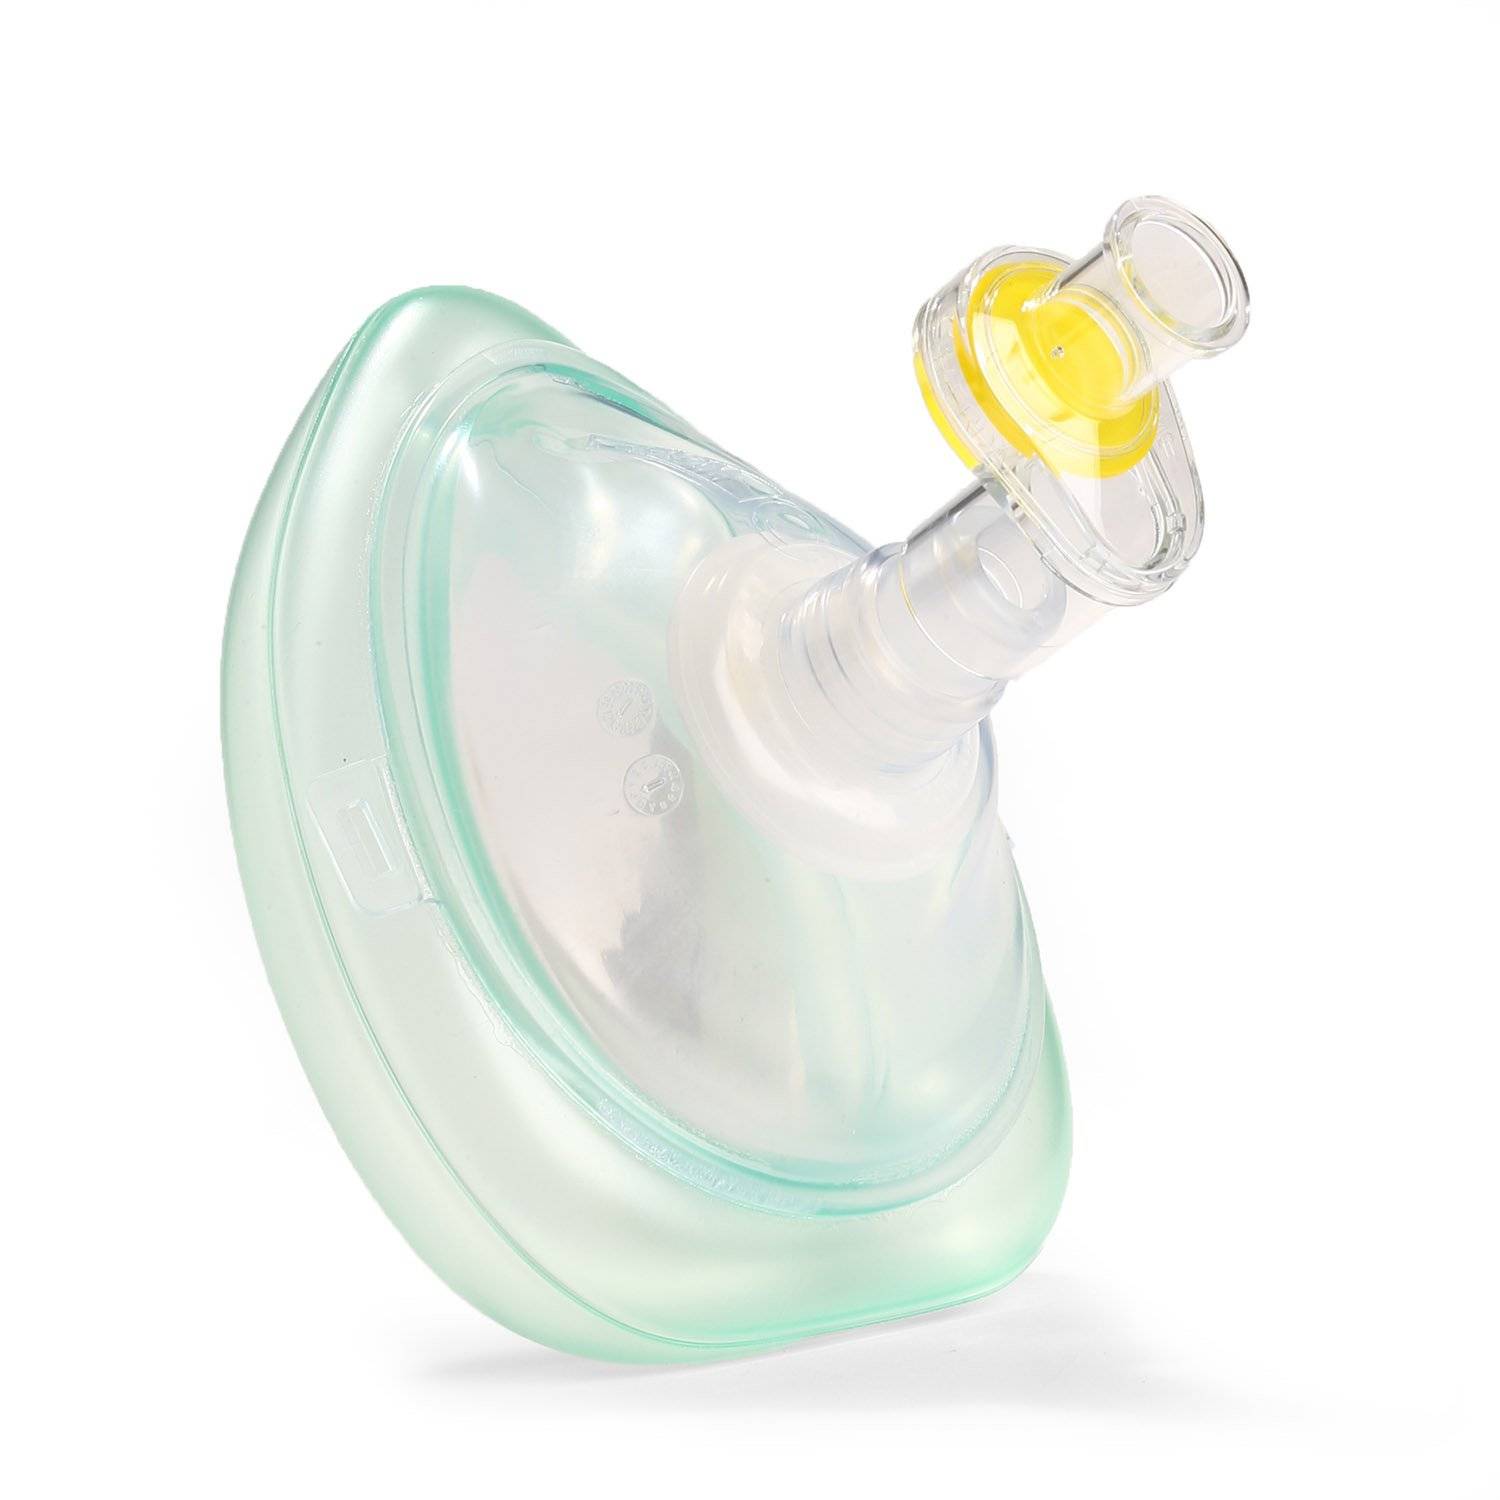 DYNA MED CPR MASK WITH ONE-WAY VALVE